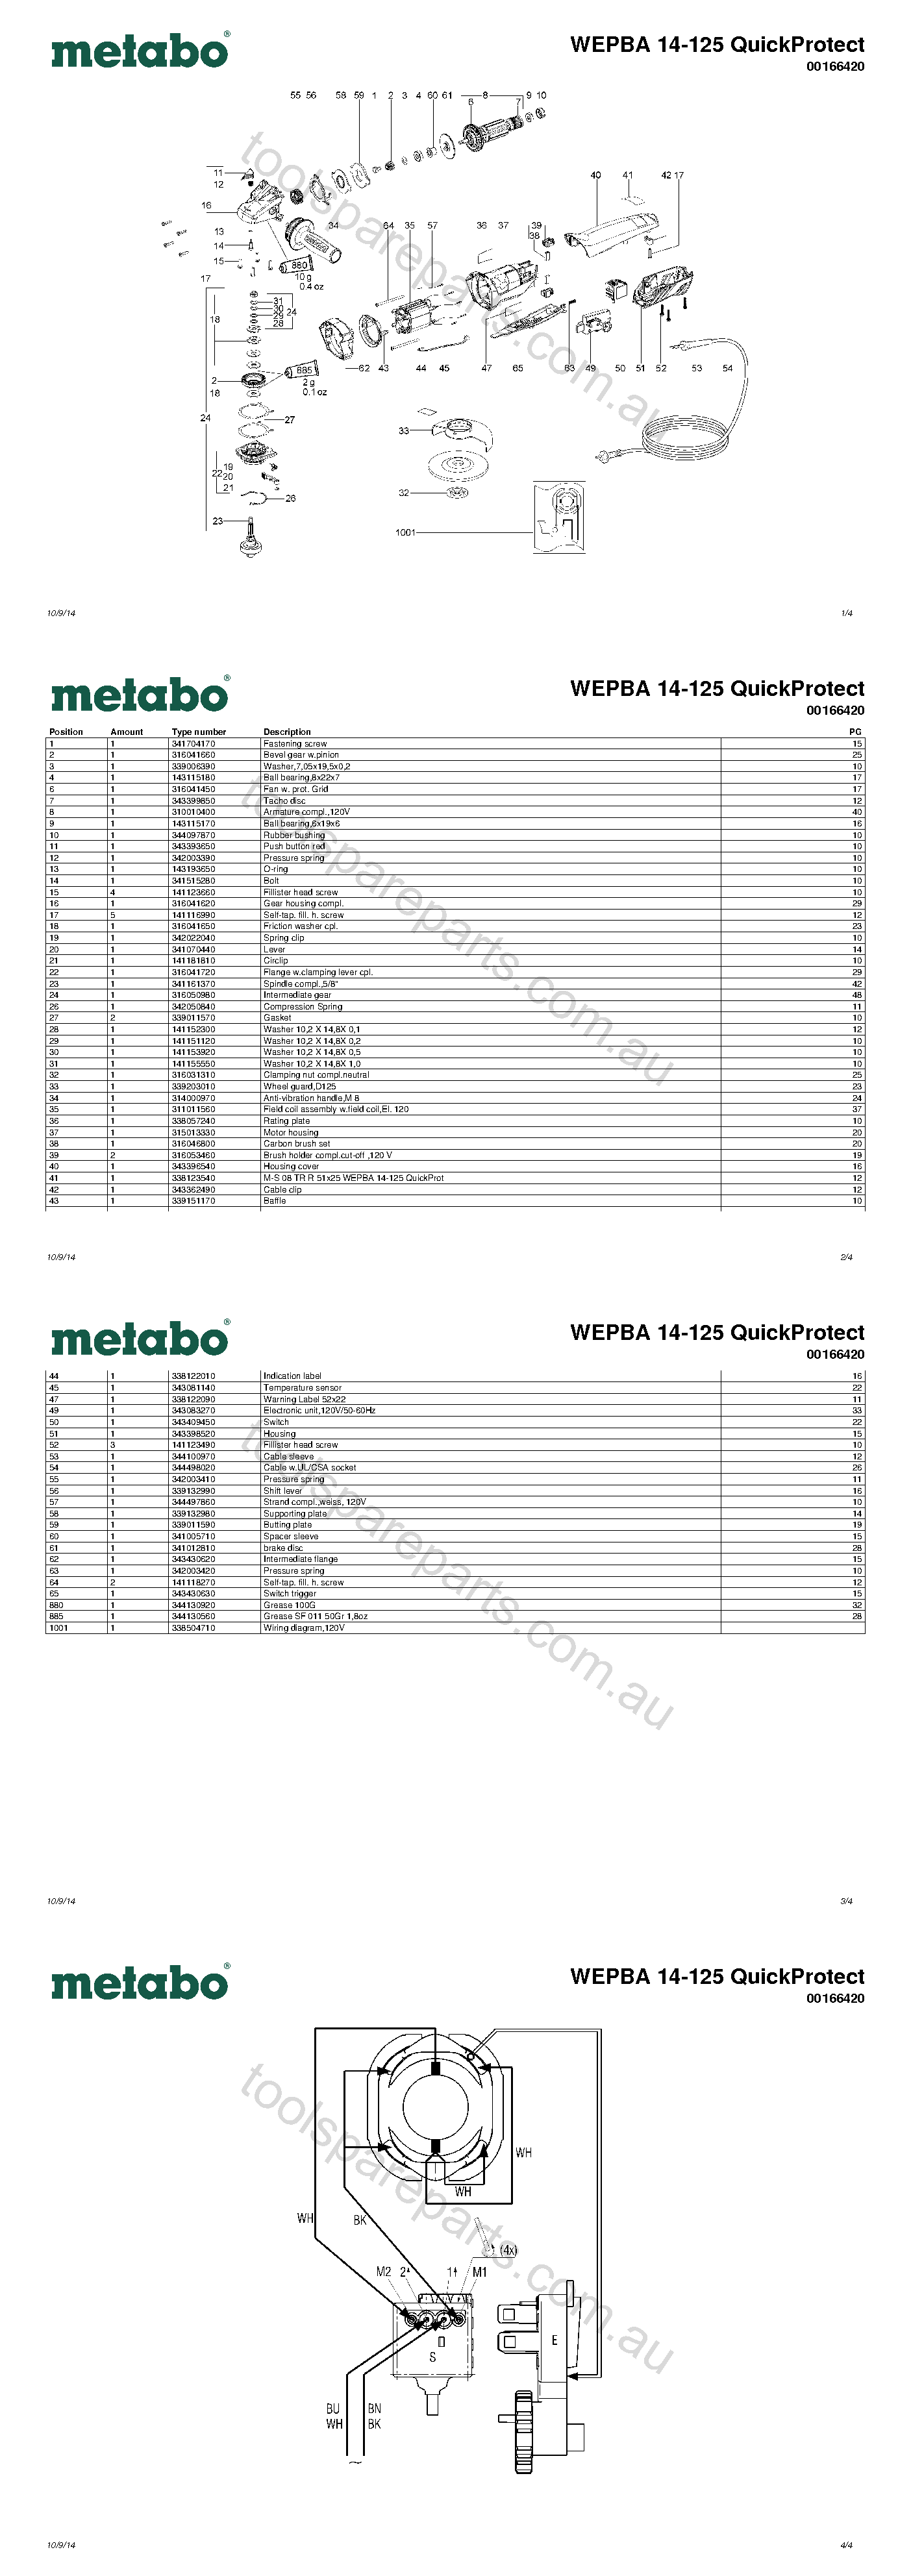  WEPBA 14-125 QuickProtect 00166420 Spare Parts